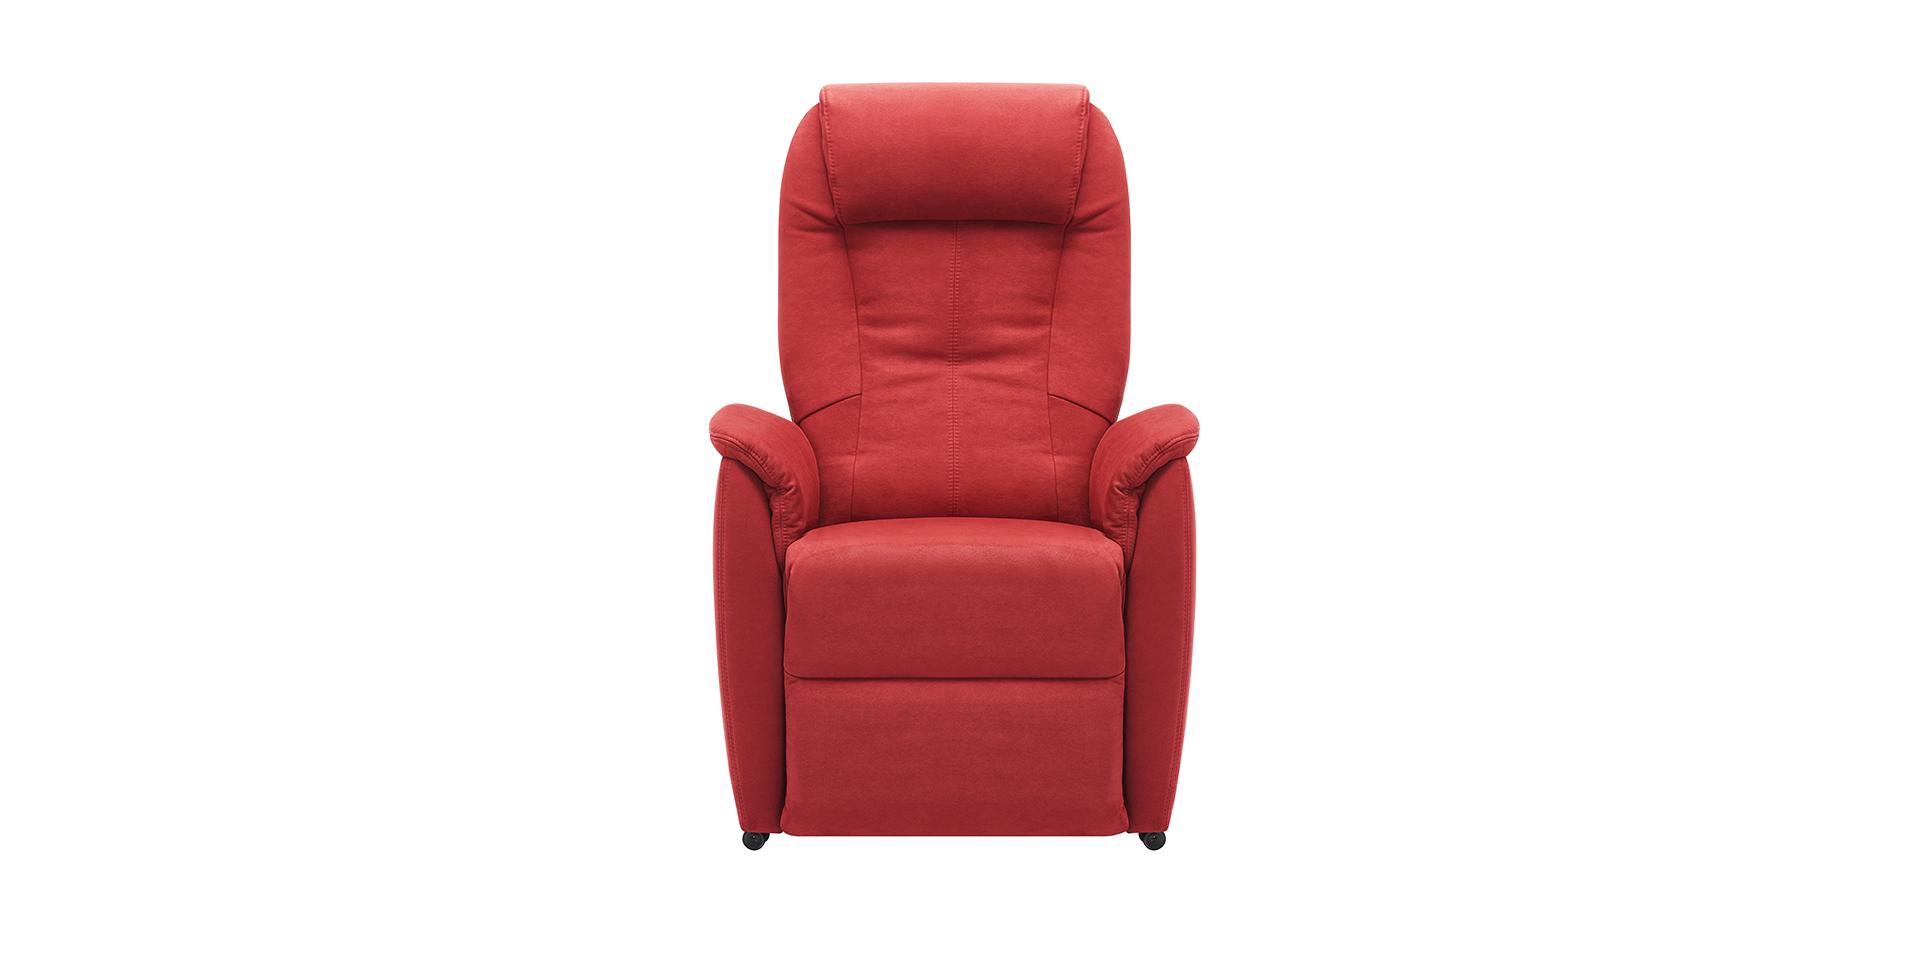 Fauteuil inclinable - Meubles